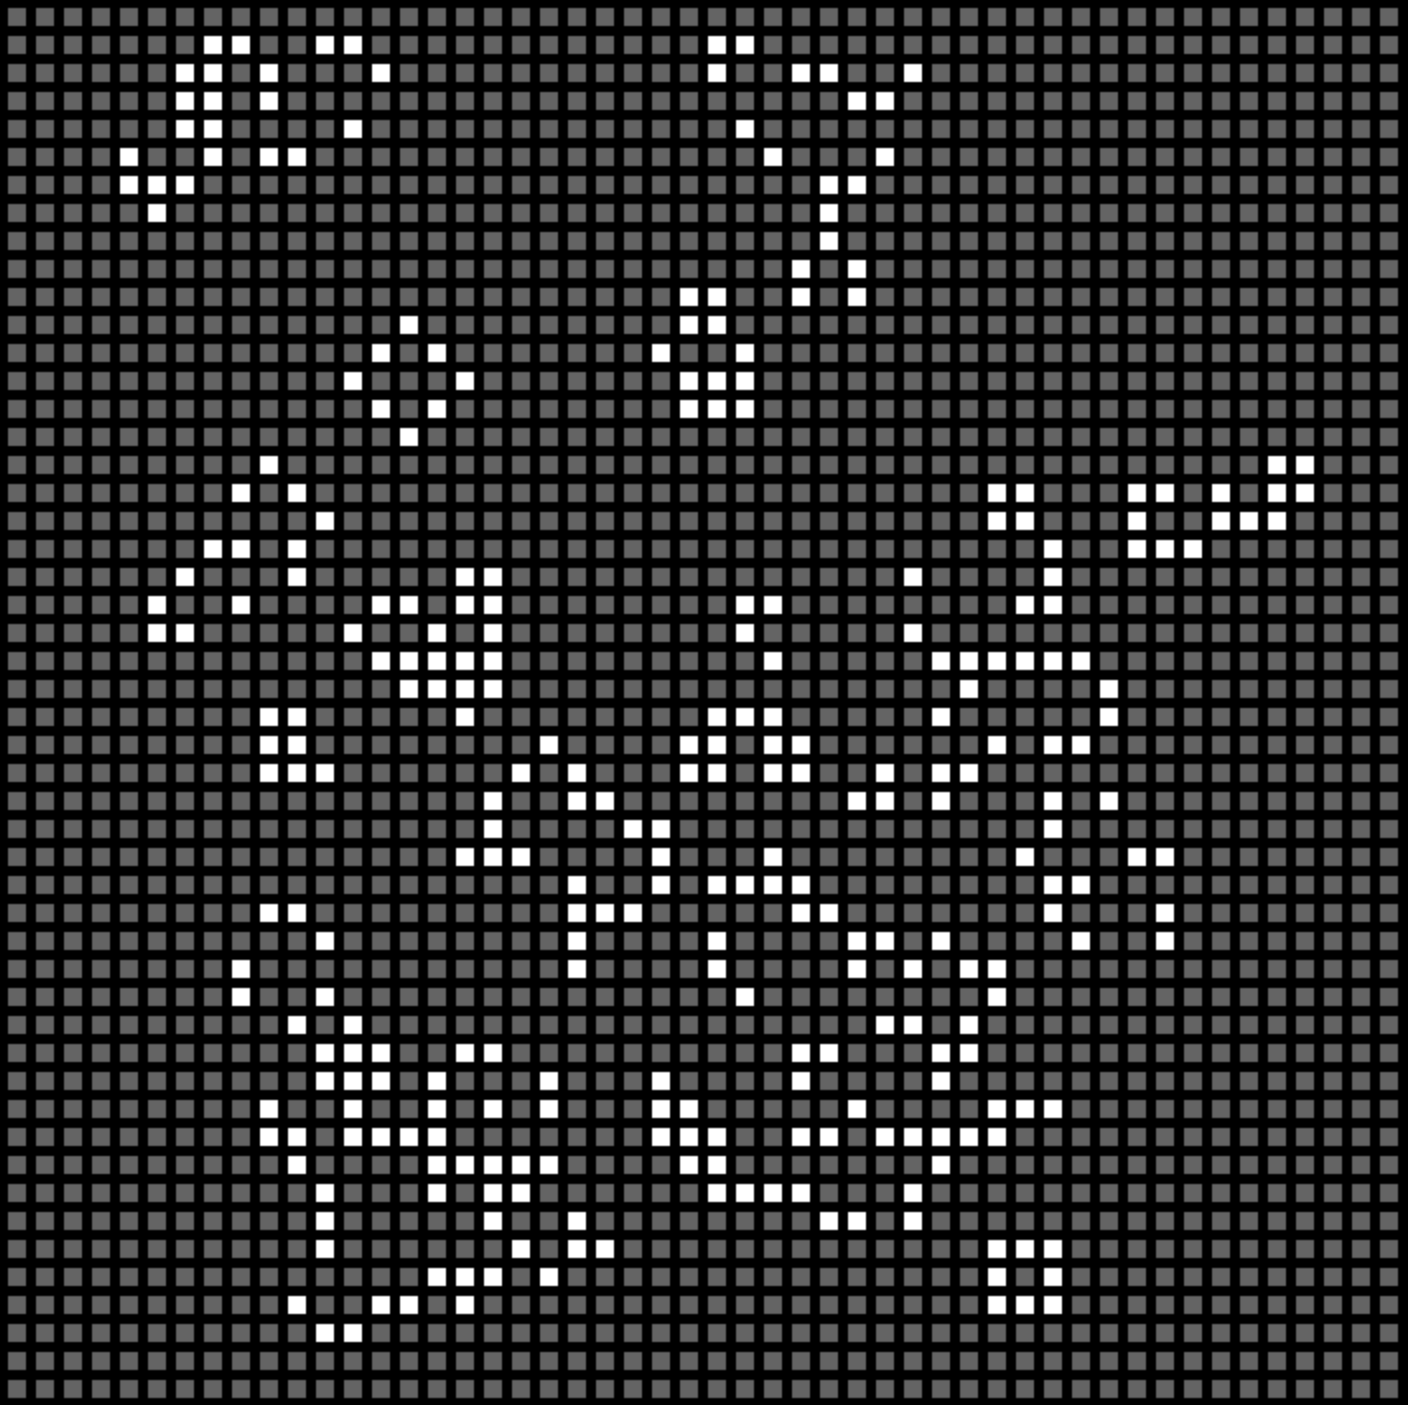 Pic of Conway's Game of Life